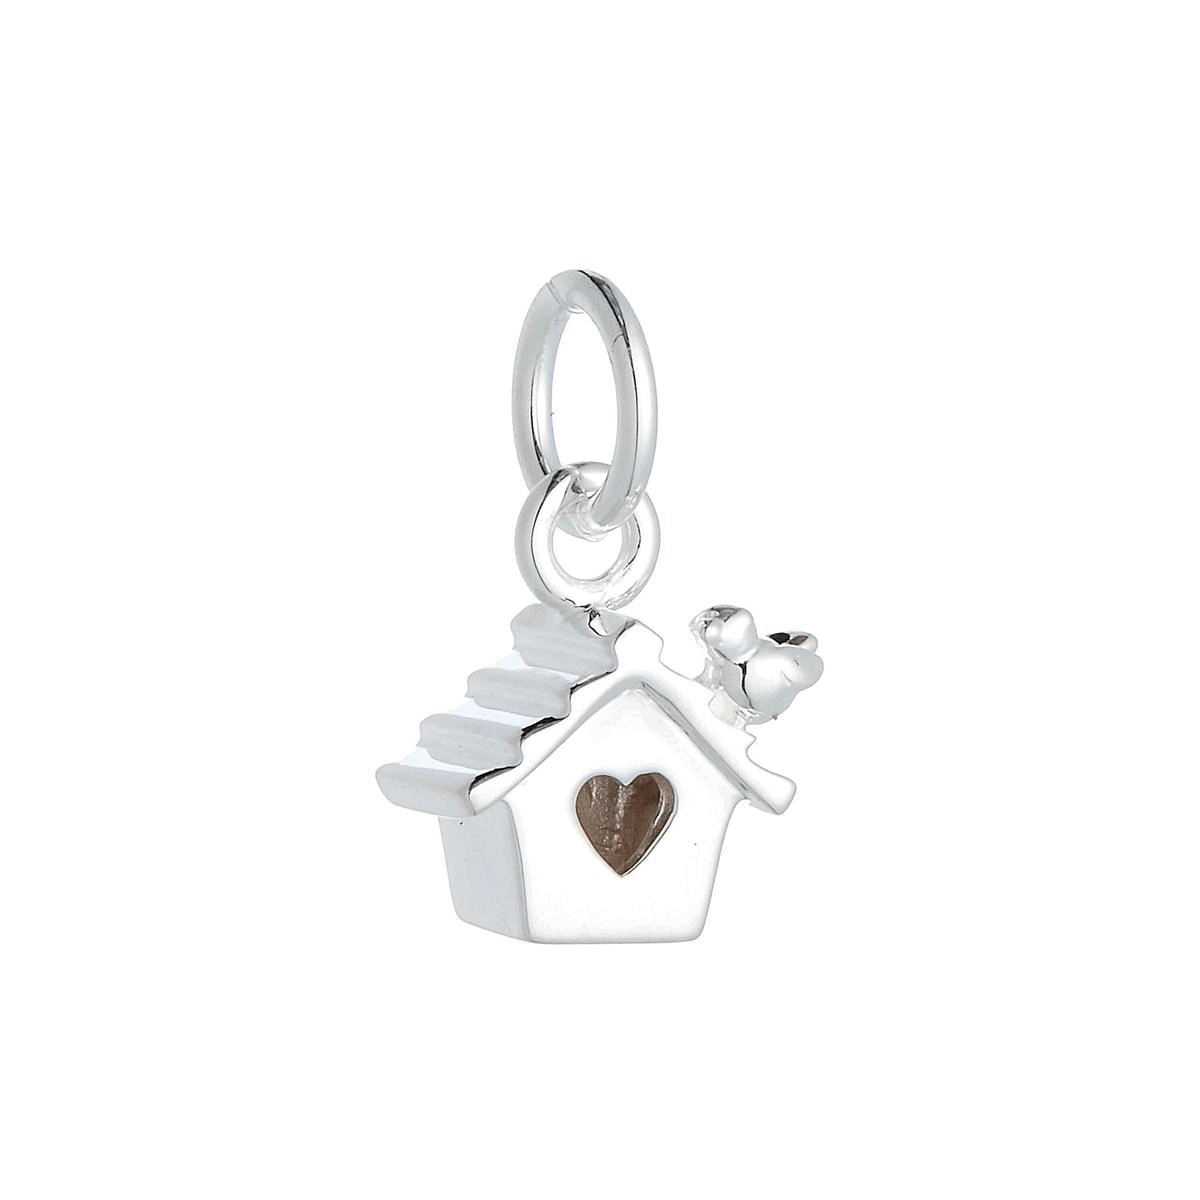 solid silver bird house charm with a heart shaped door and tiny bird FREE UK DELIVERY